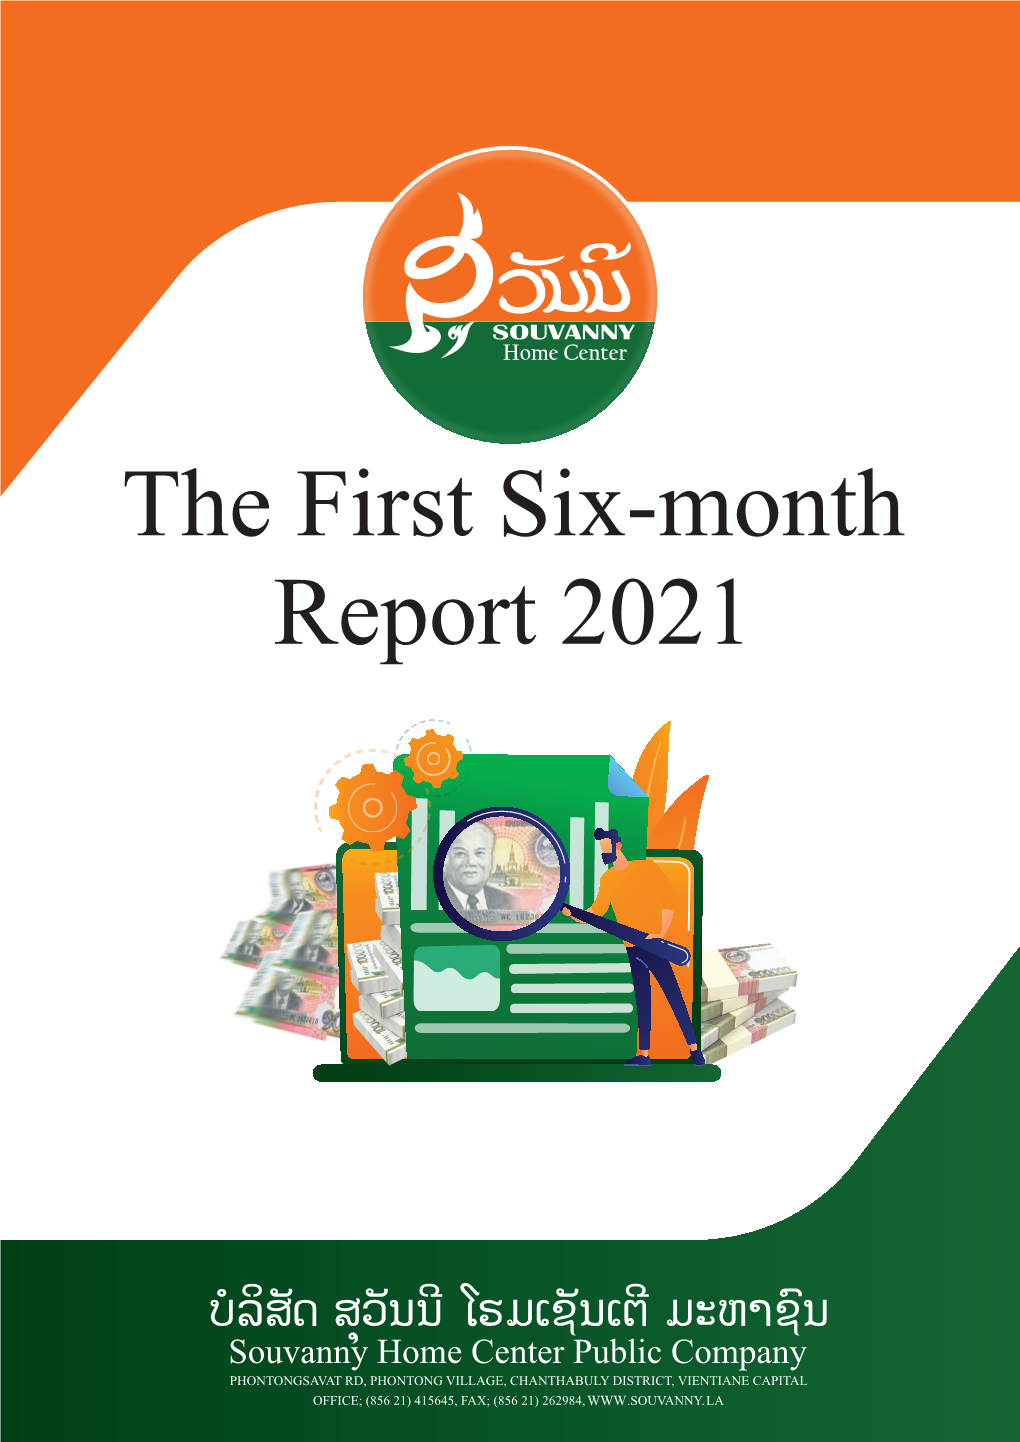 The First Six-Month Report 2021